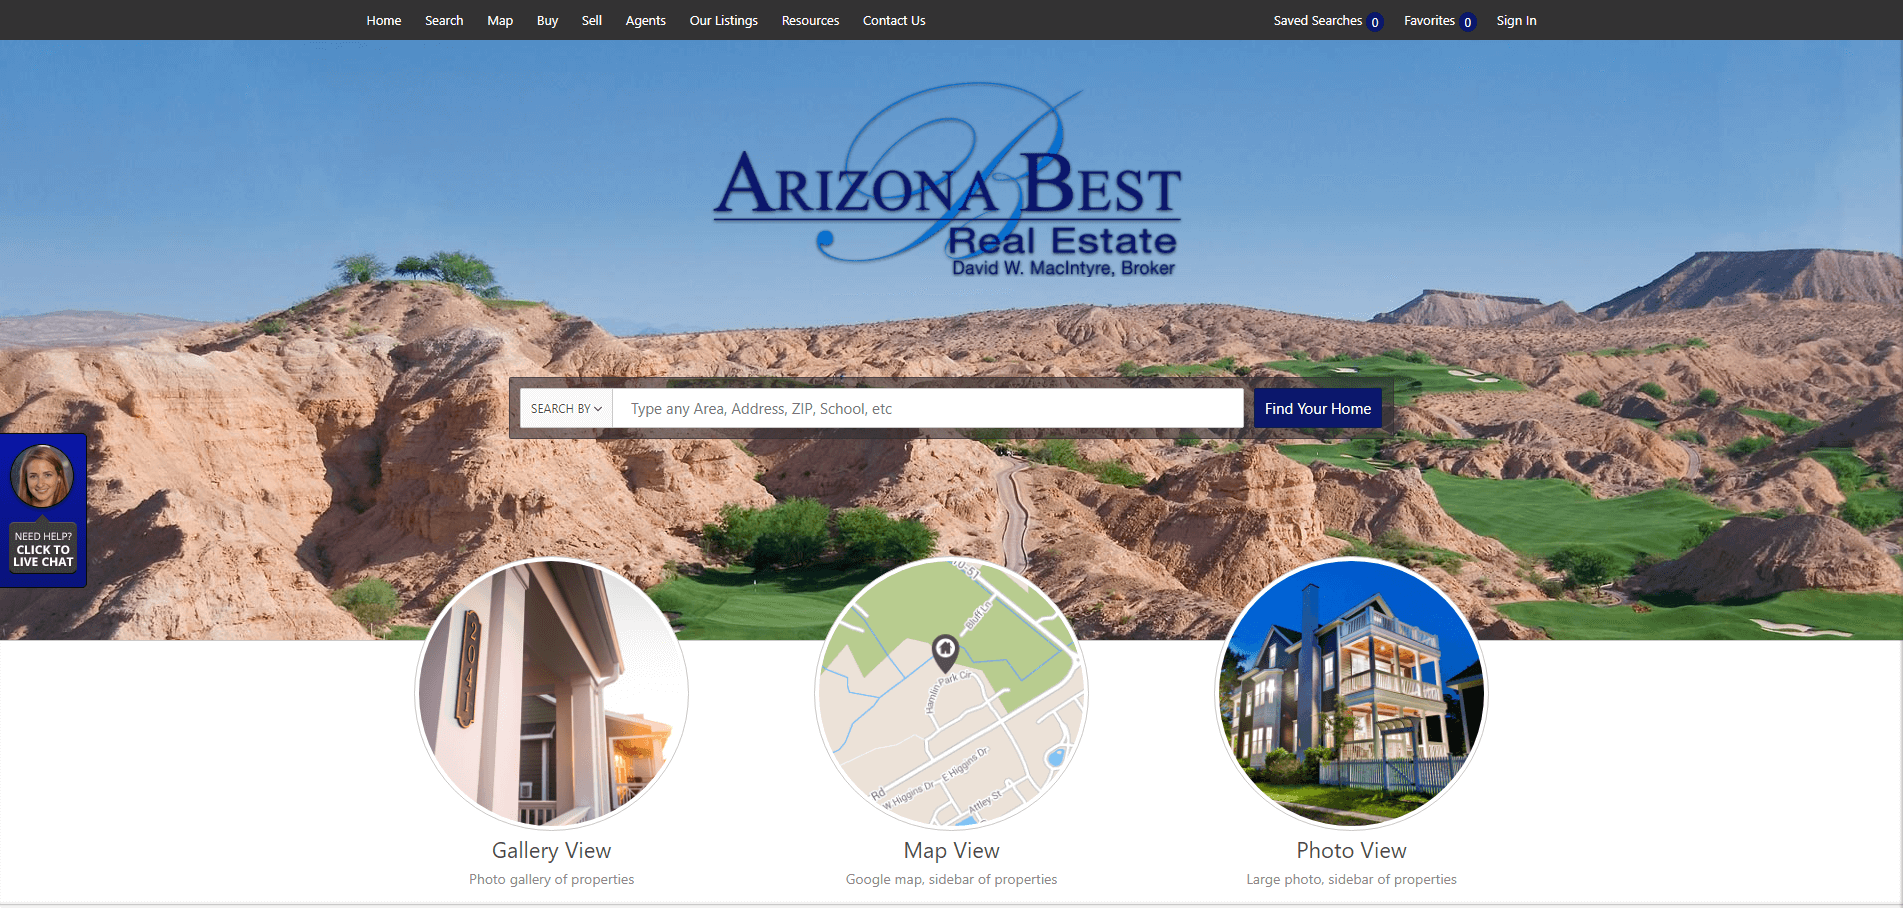  Whoa!  This is a list of the 101 best real estate websites.  We reviewed each site and ranked them 1-101.  Here's arizonabest.com.  Guess who made #1! 